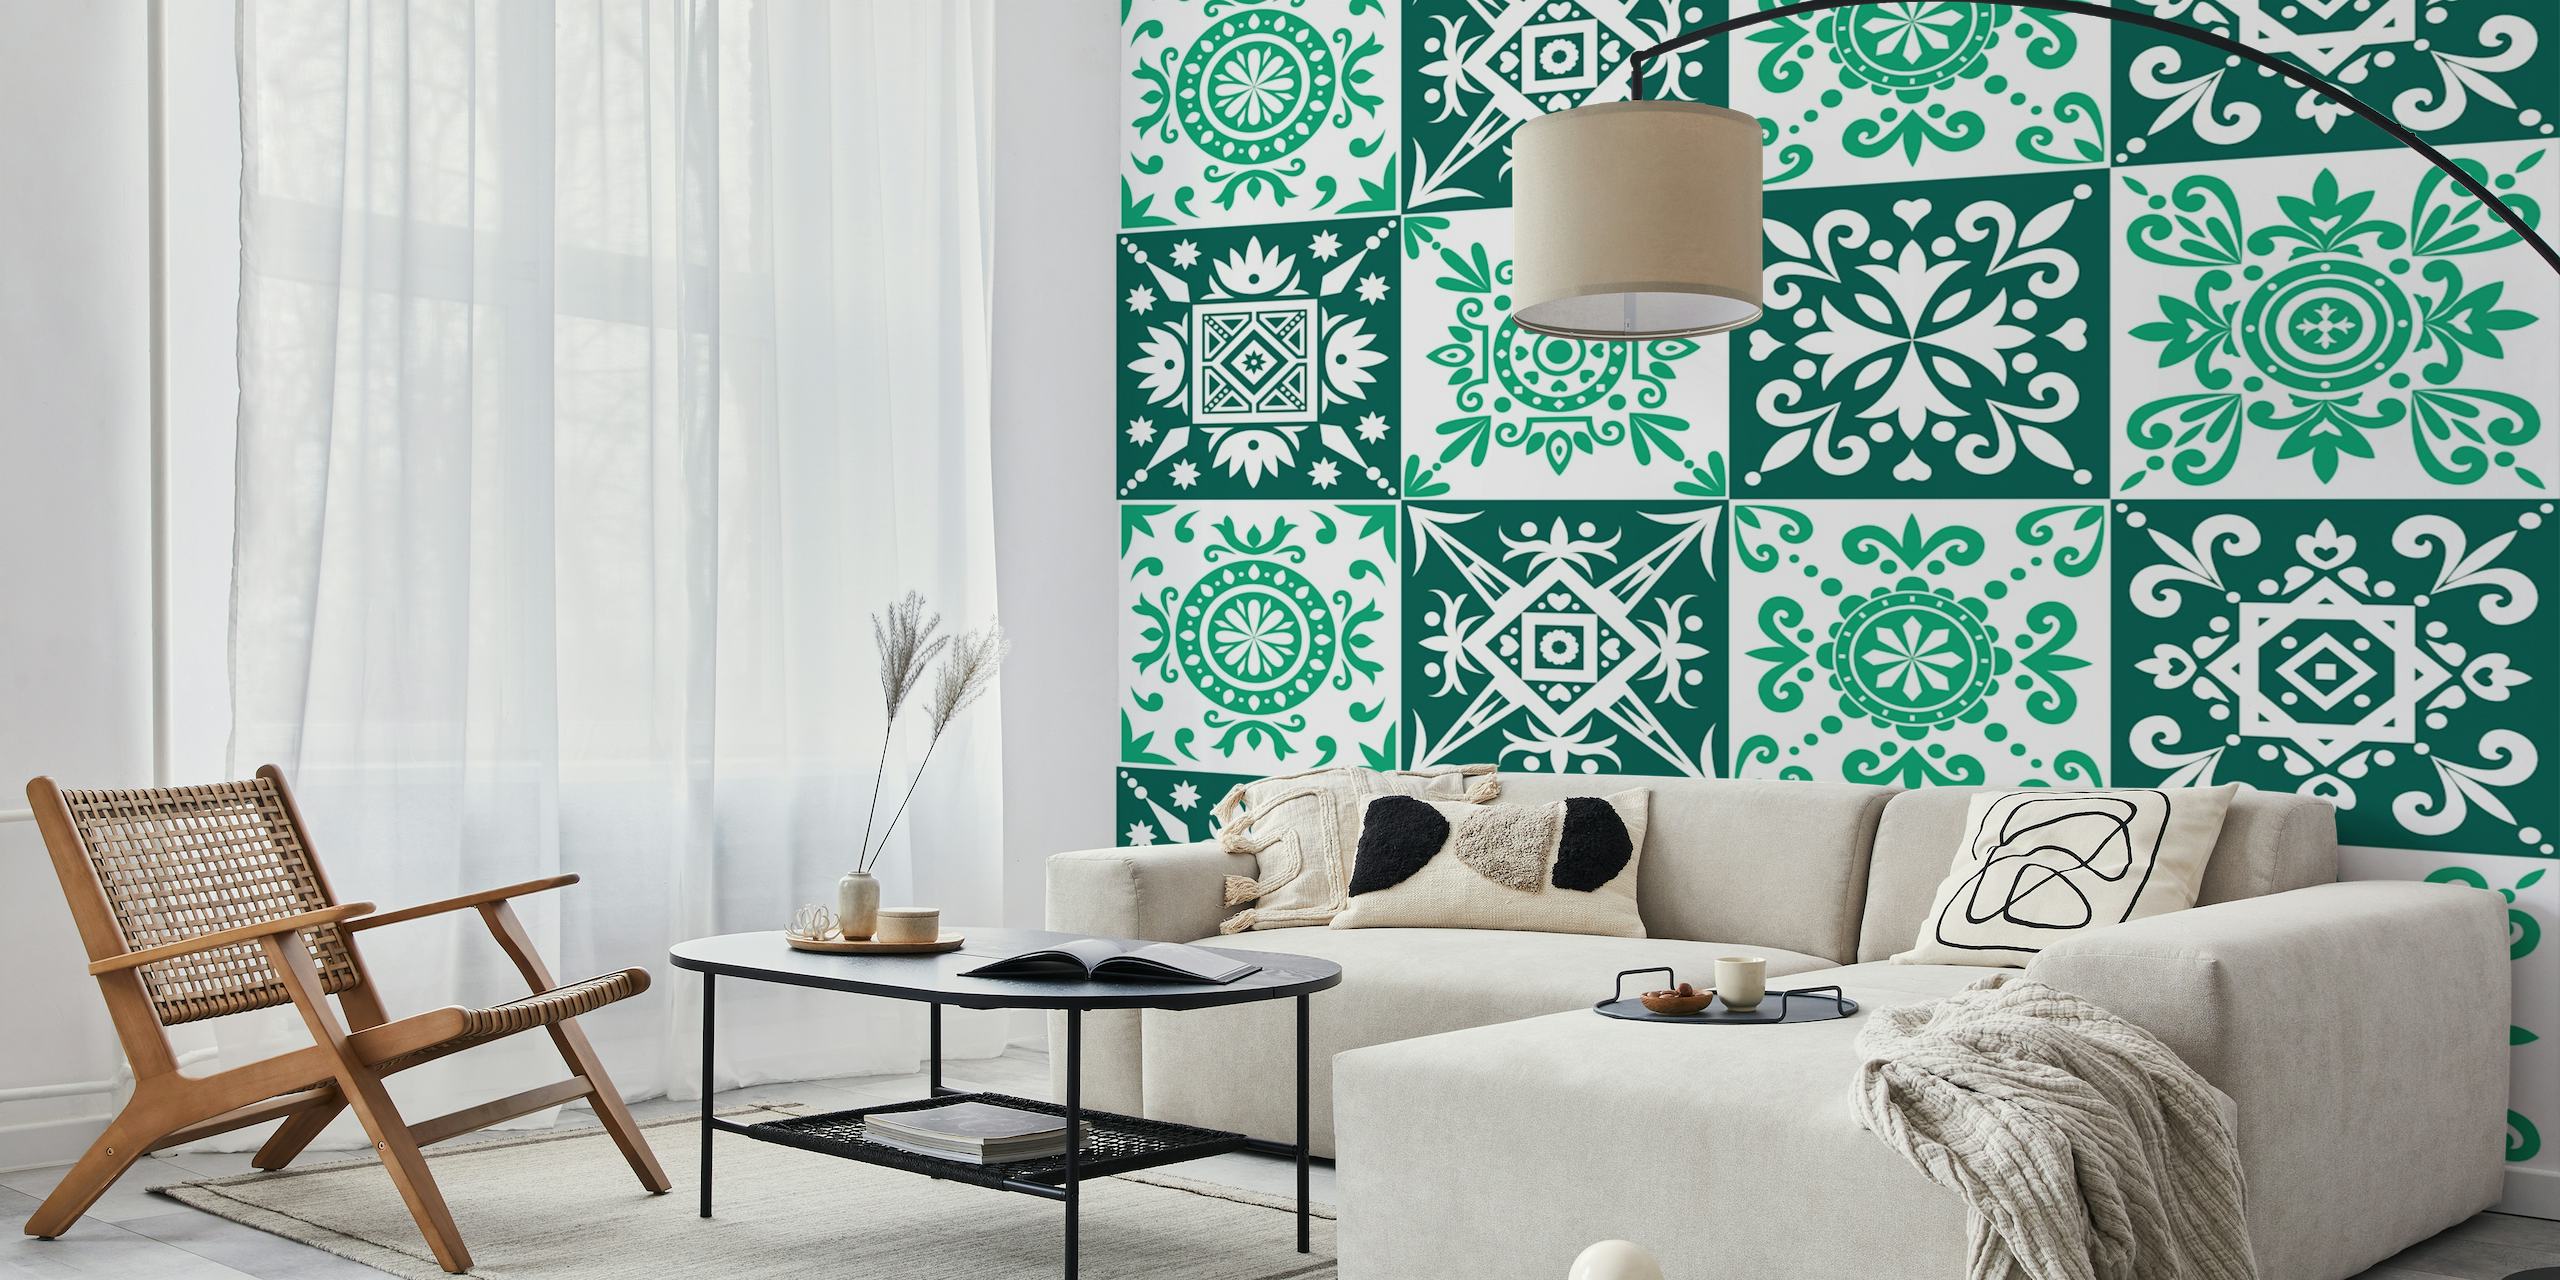 Spanish tile in jungle and emerald wallpaper